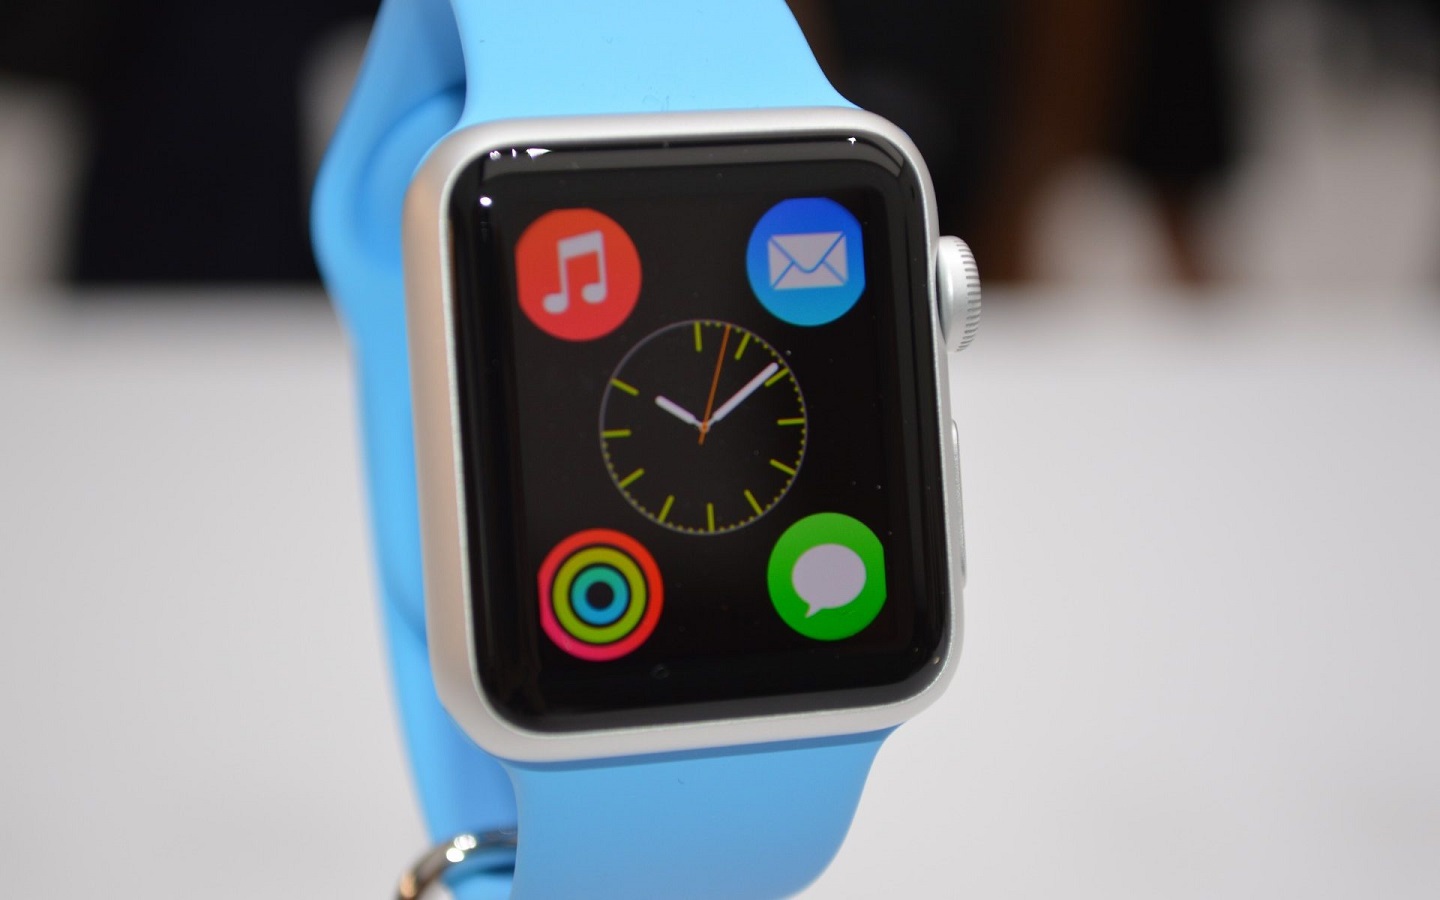 How to develop an app for Apple Watch